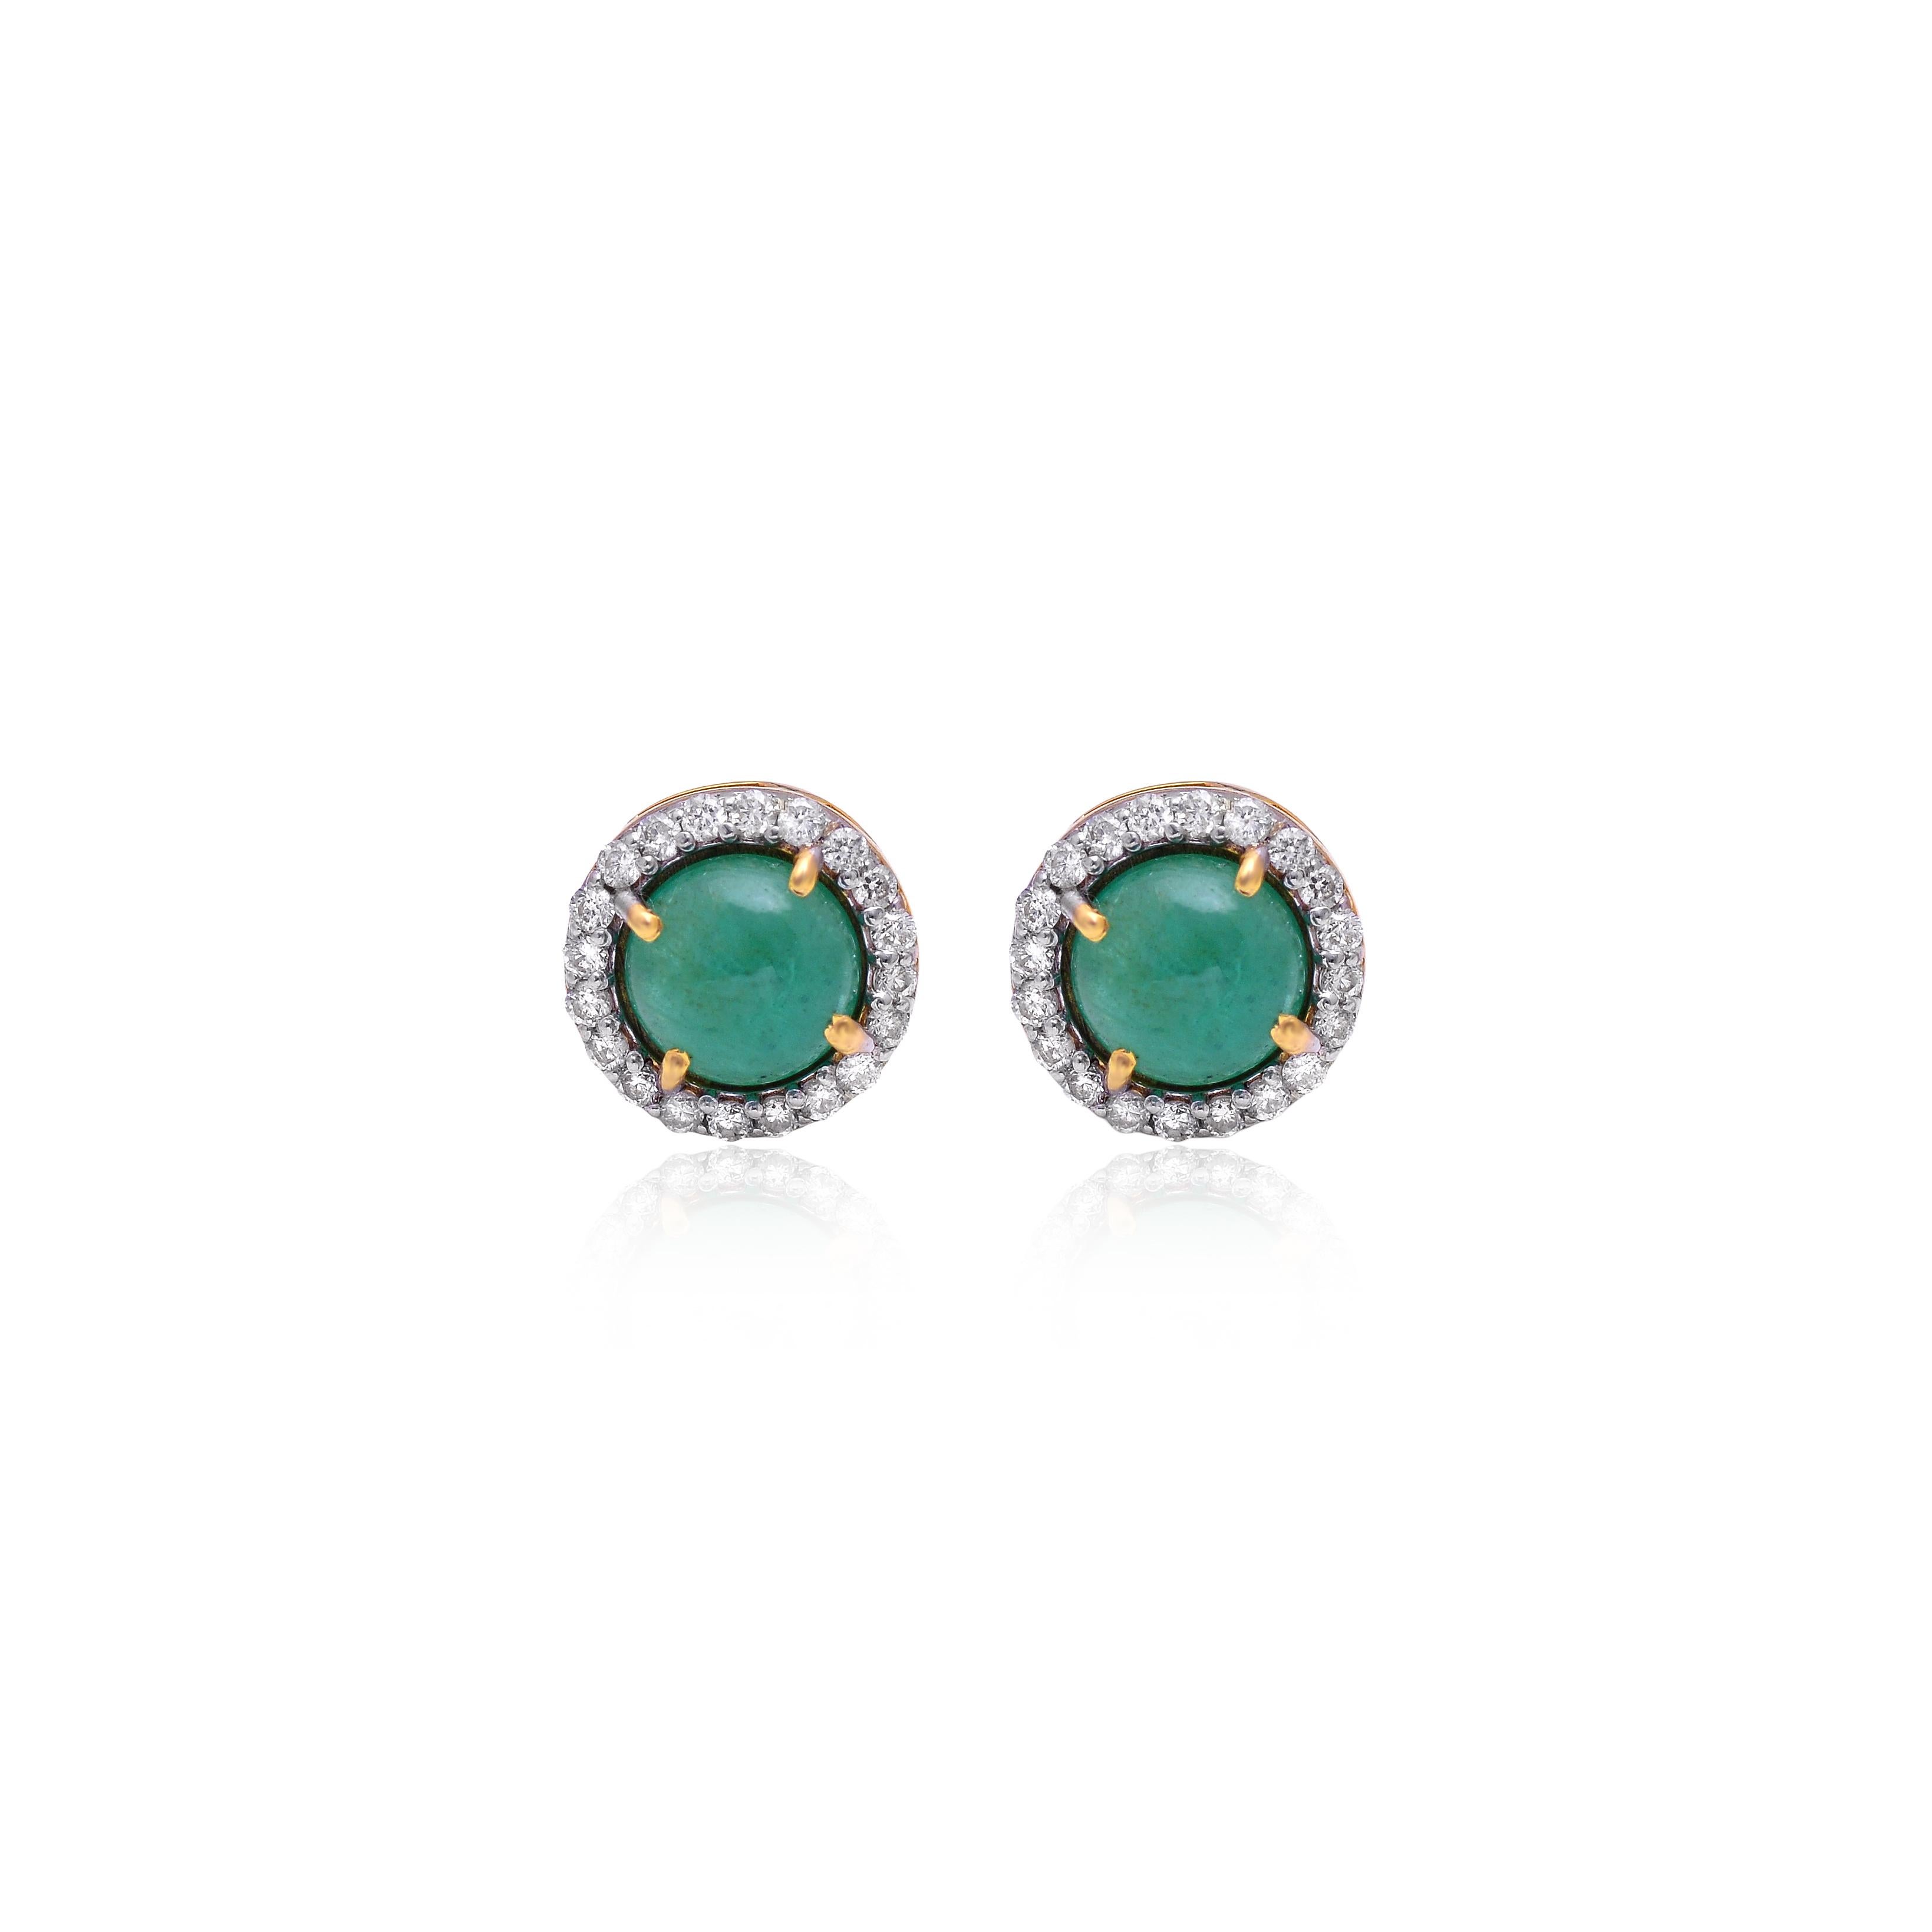 Emerald Cut Emerald Stud Earrings with Diamond in 14k Gold For Sale